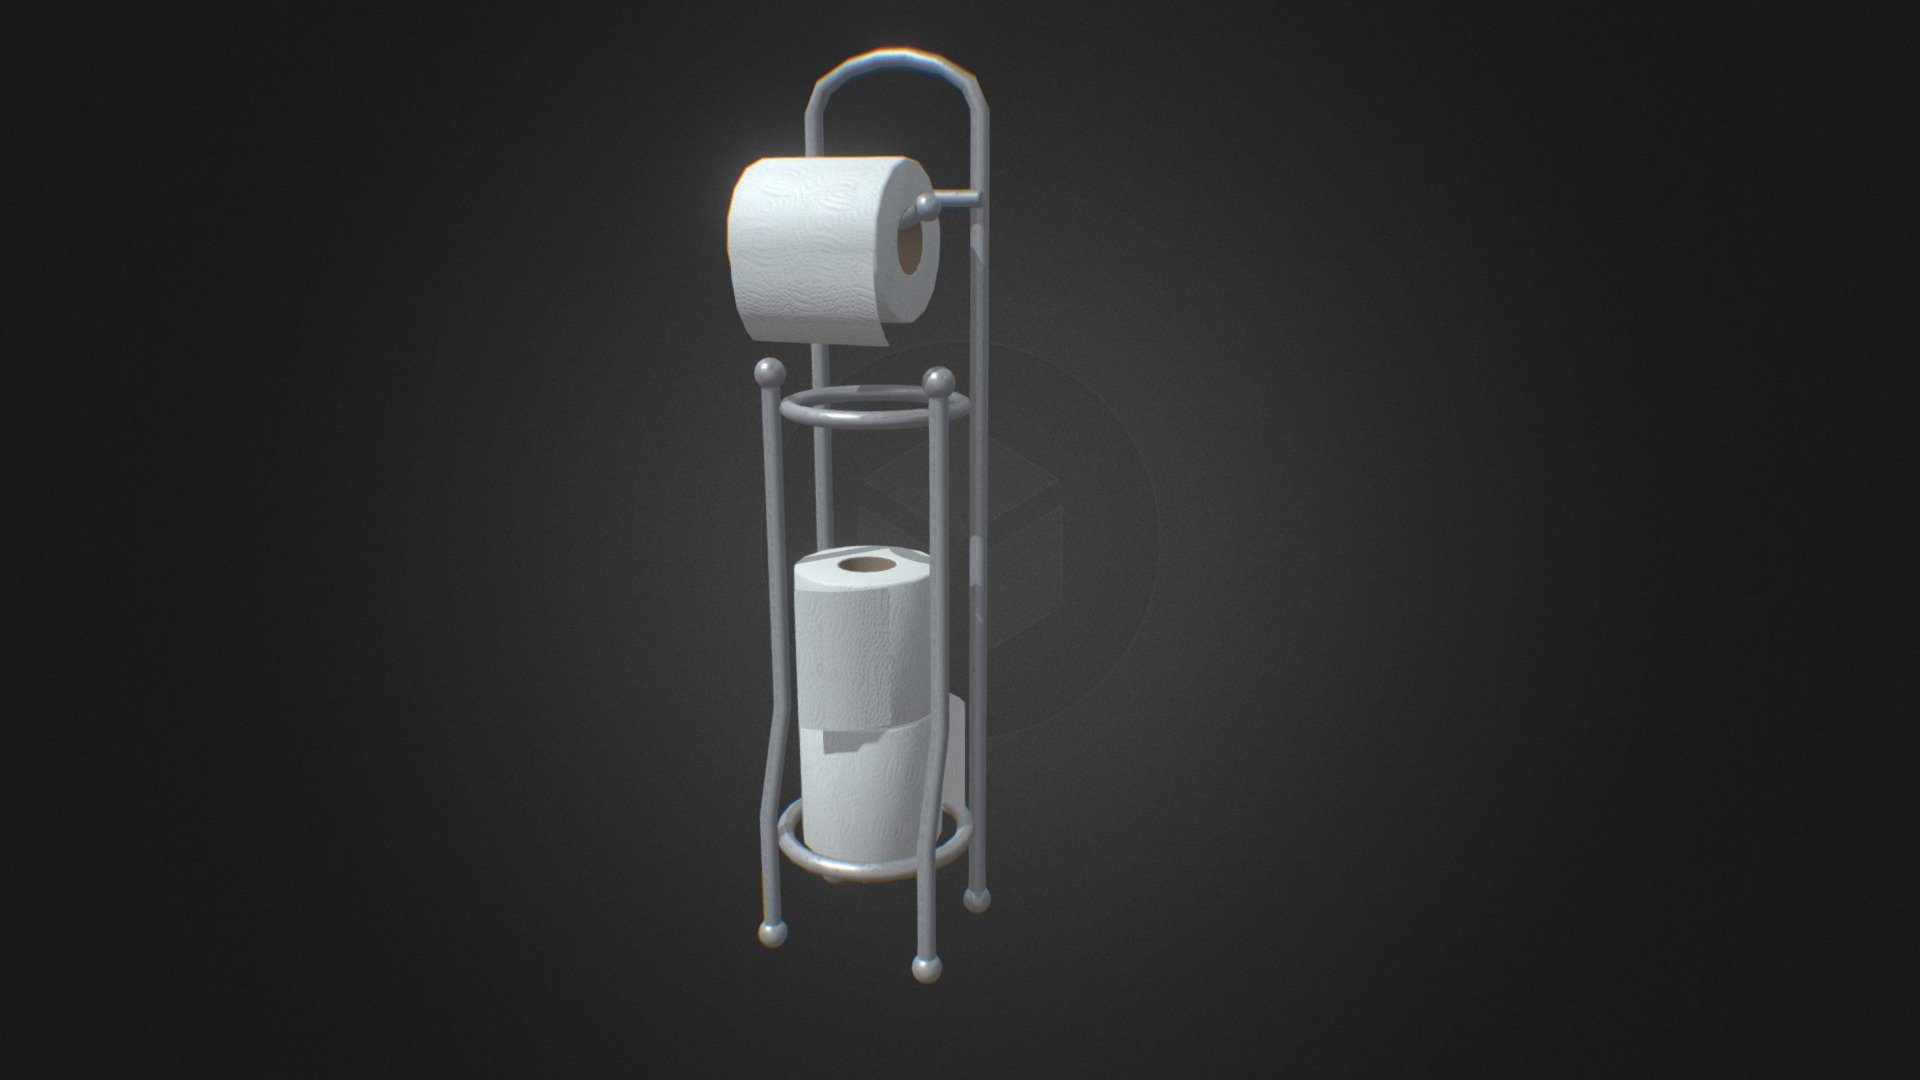 Here is a simple toilet paper stand/holder that i created, not much but hope you like it :P. I thought it be interesting to make the toilet papers move around so i made a loop 3d model